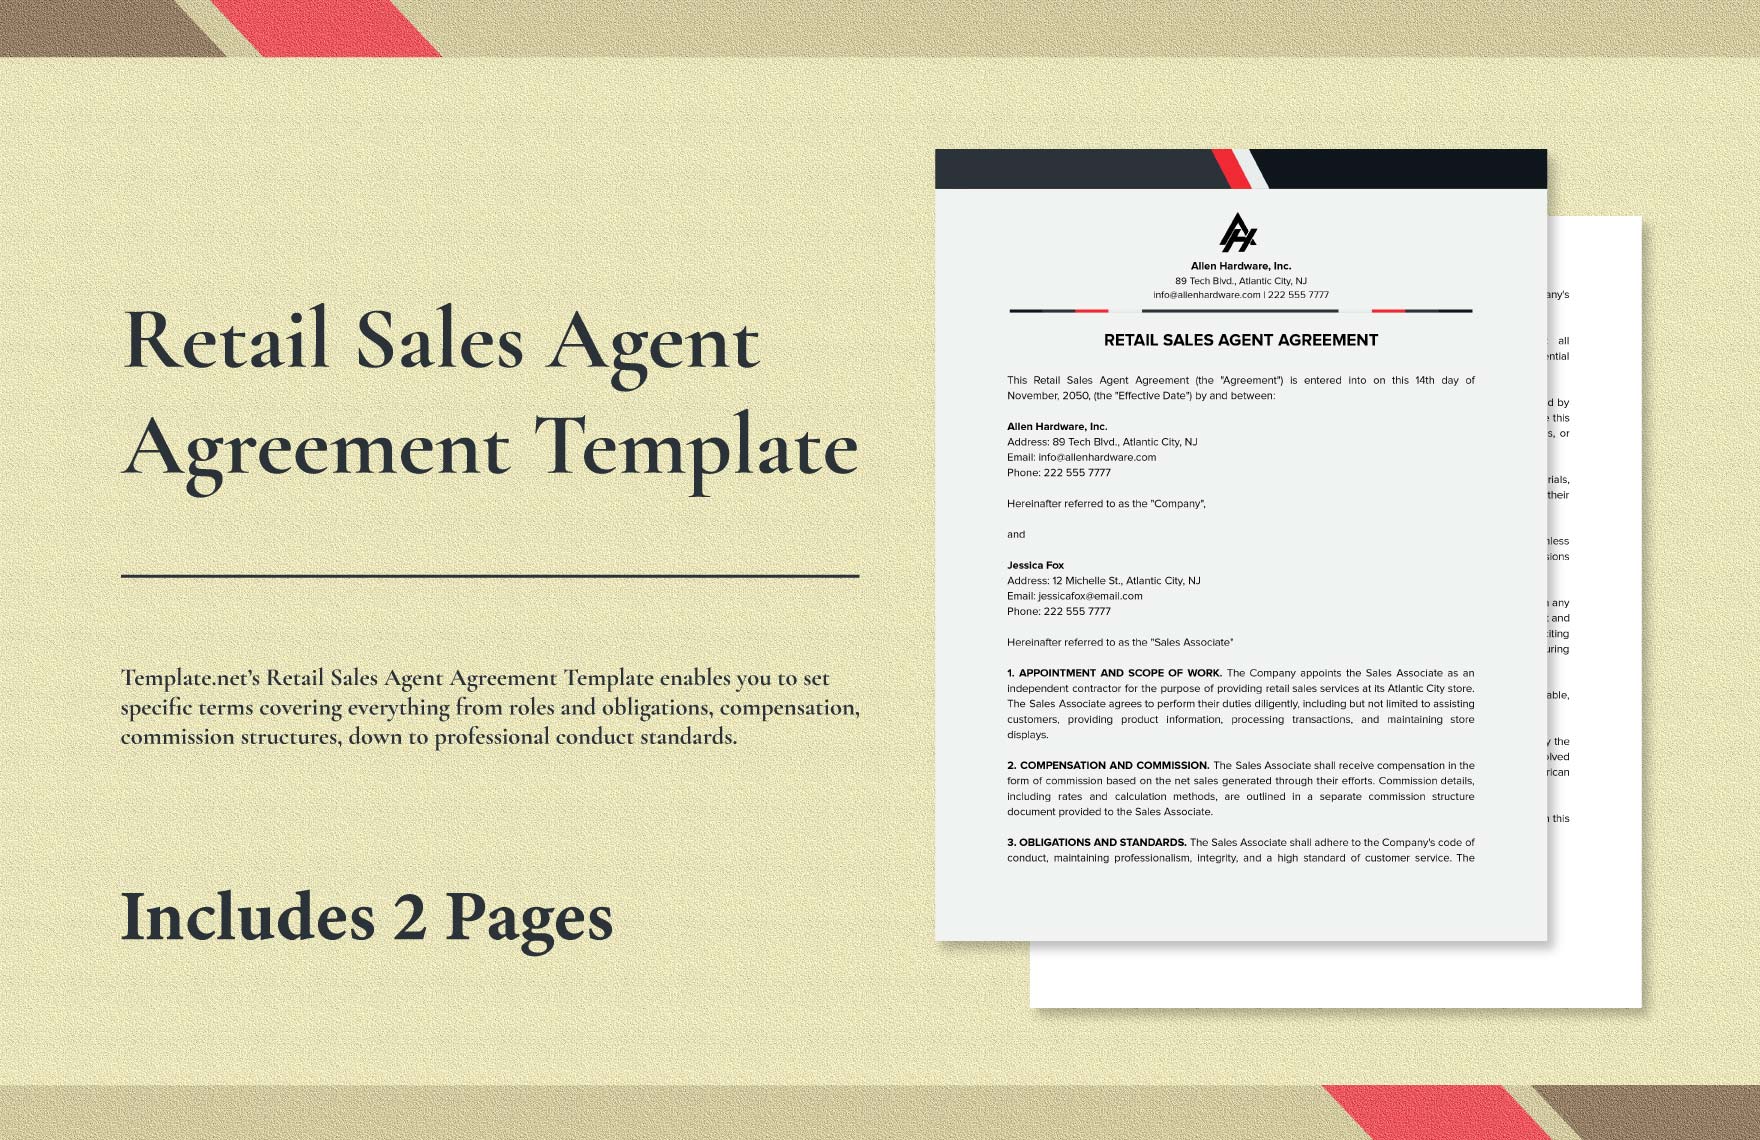 Retail Sales Agent Agreement Template